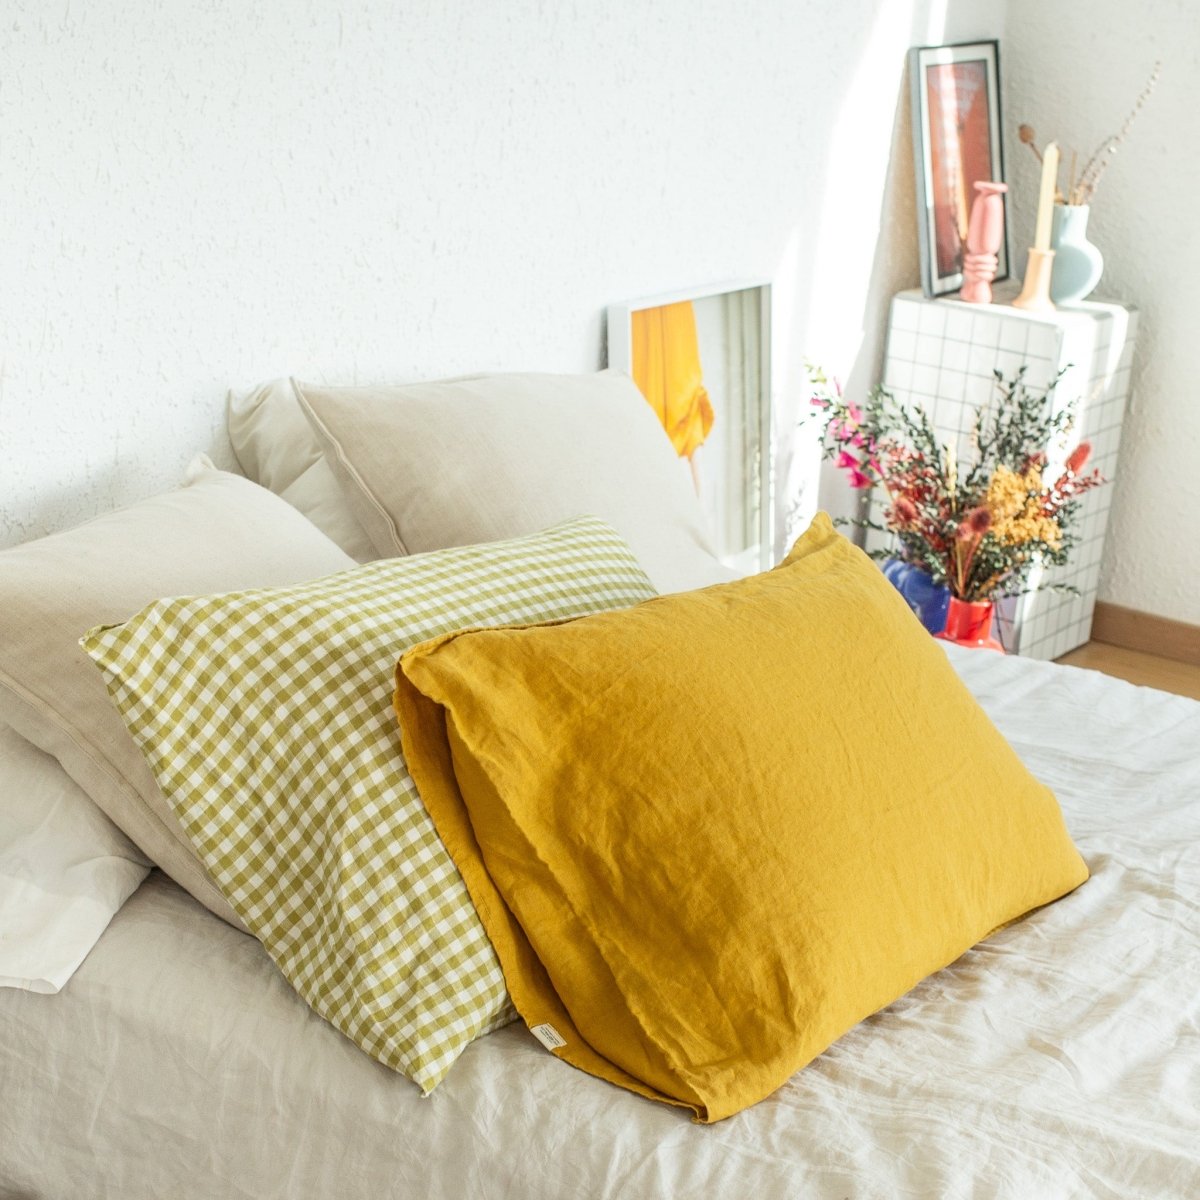 Set of 4 Pillowcases EURO SIZE (26x26 in | 65x65 cm) - notPERFECTLINEN